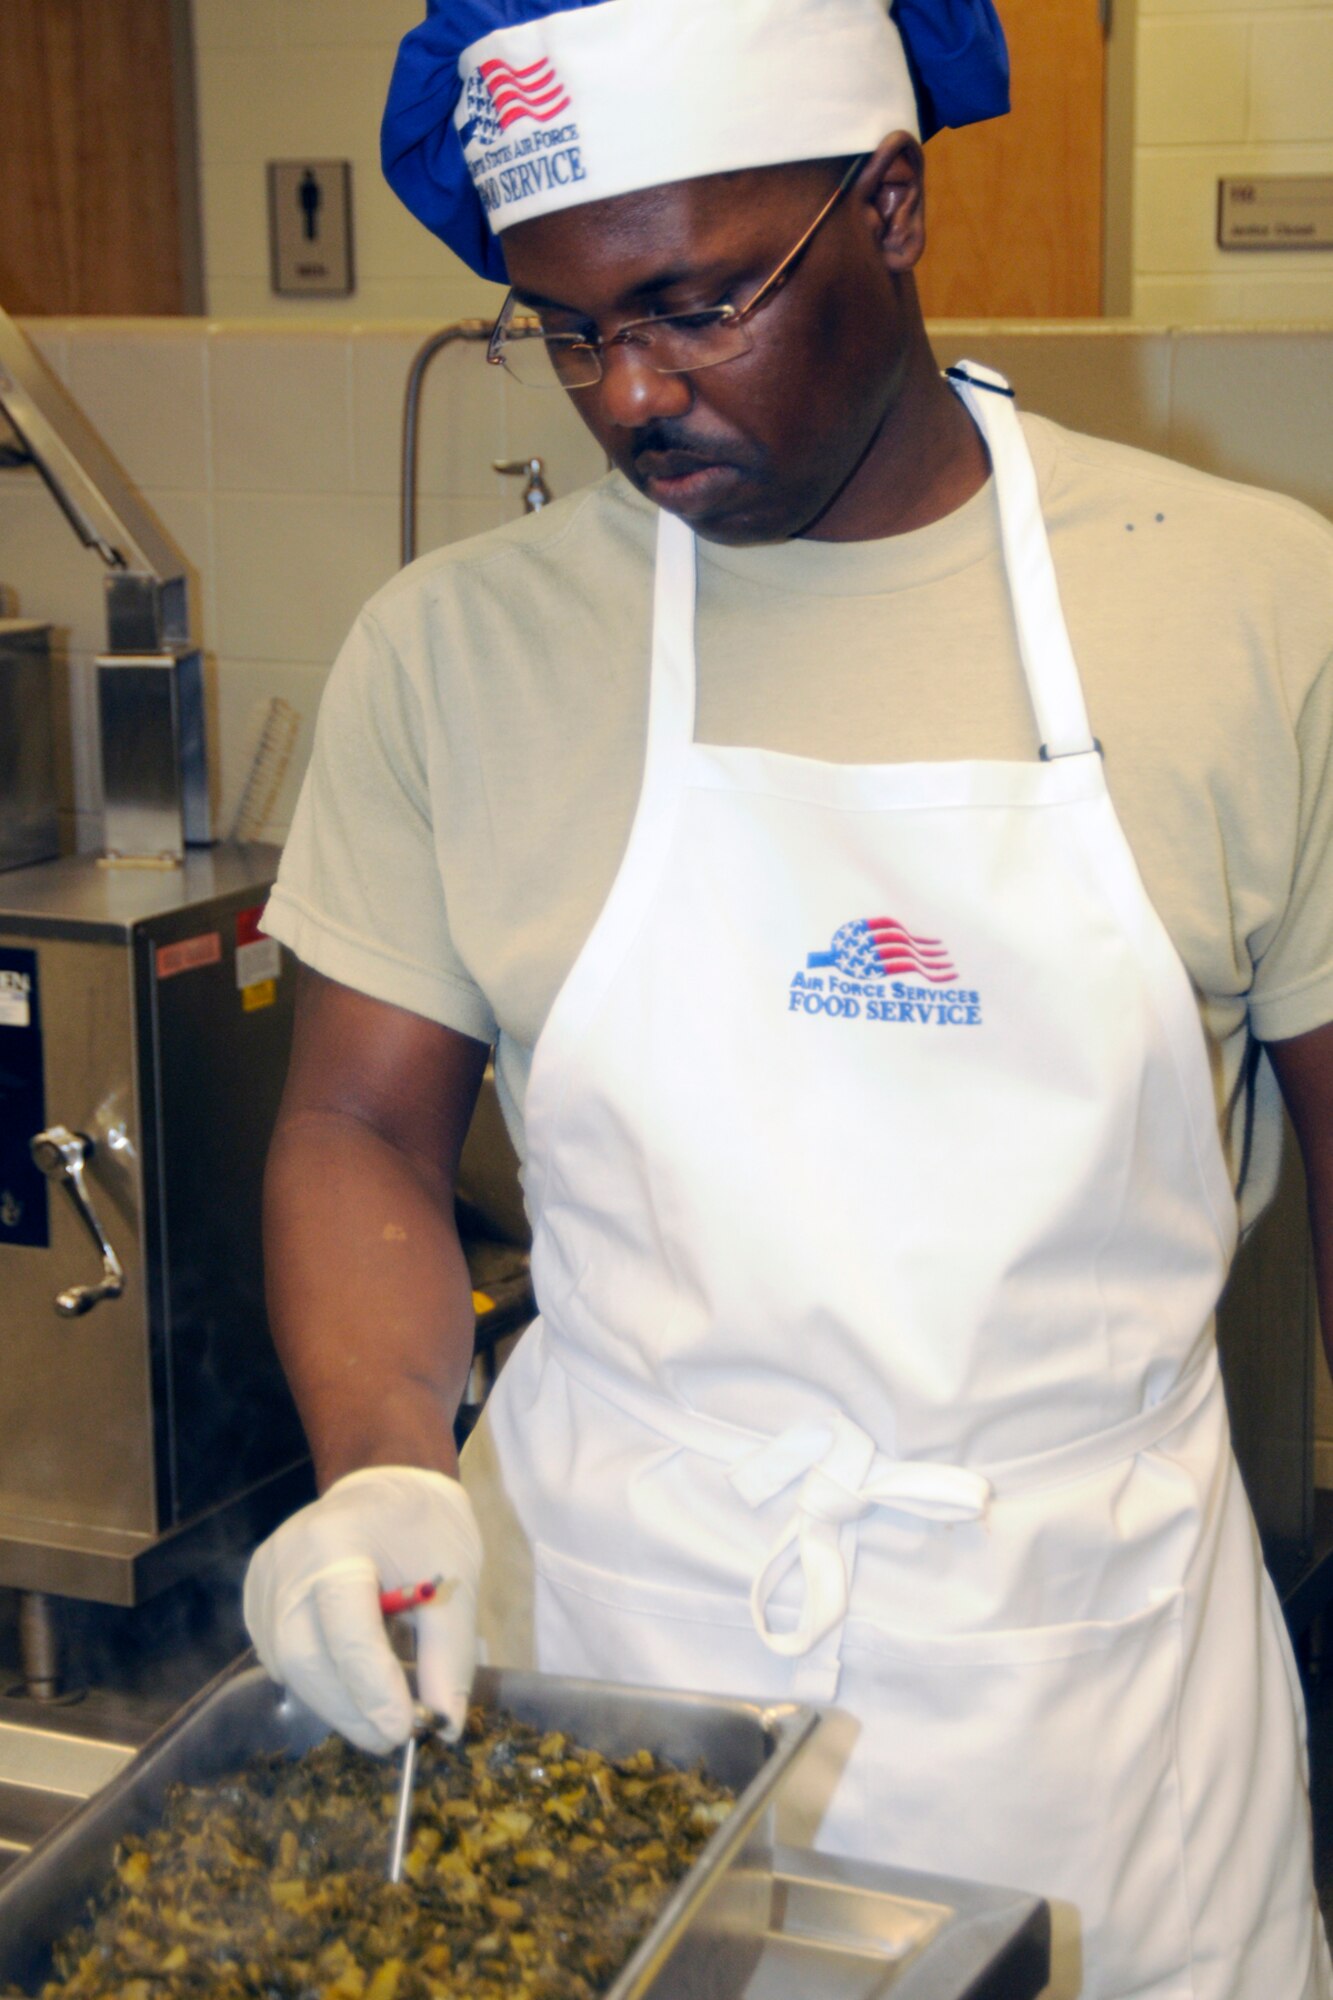 Technical Sgt. Milton Rogers helps prepare a meal during the February UTA of the 127th Wing at Selfridge Air National Guard Base, Mich., Feb. 12, 2011. The Wing’s food services unit, part of the 127th Force Support Squadron, was being evaluated for an Air National Guard award. As part of the evaluation Rogers was selected by the inspection team to attend a week of training at the Culinary Institute of America in California. (U.S. Air Force photo by TSgt. David Kujawa) (RELEASED)